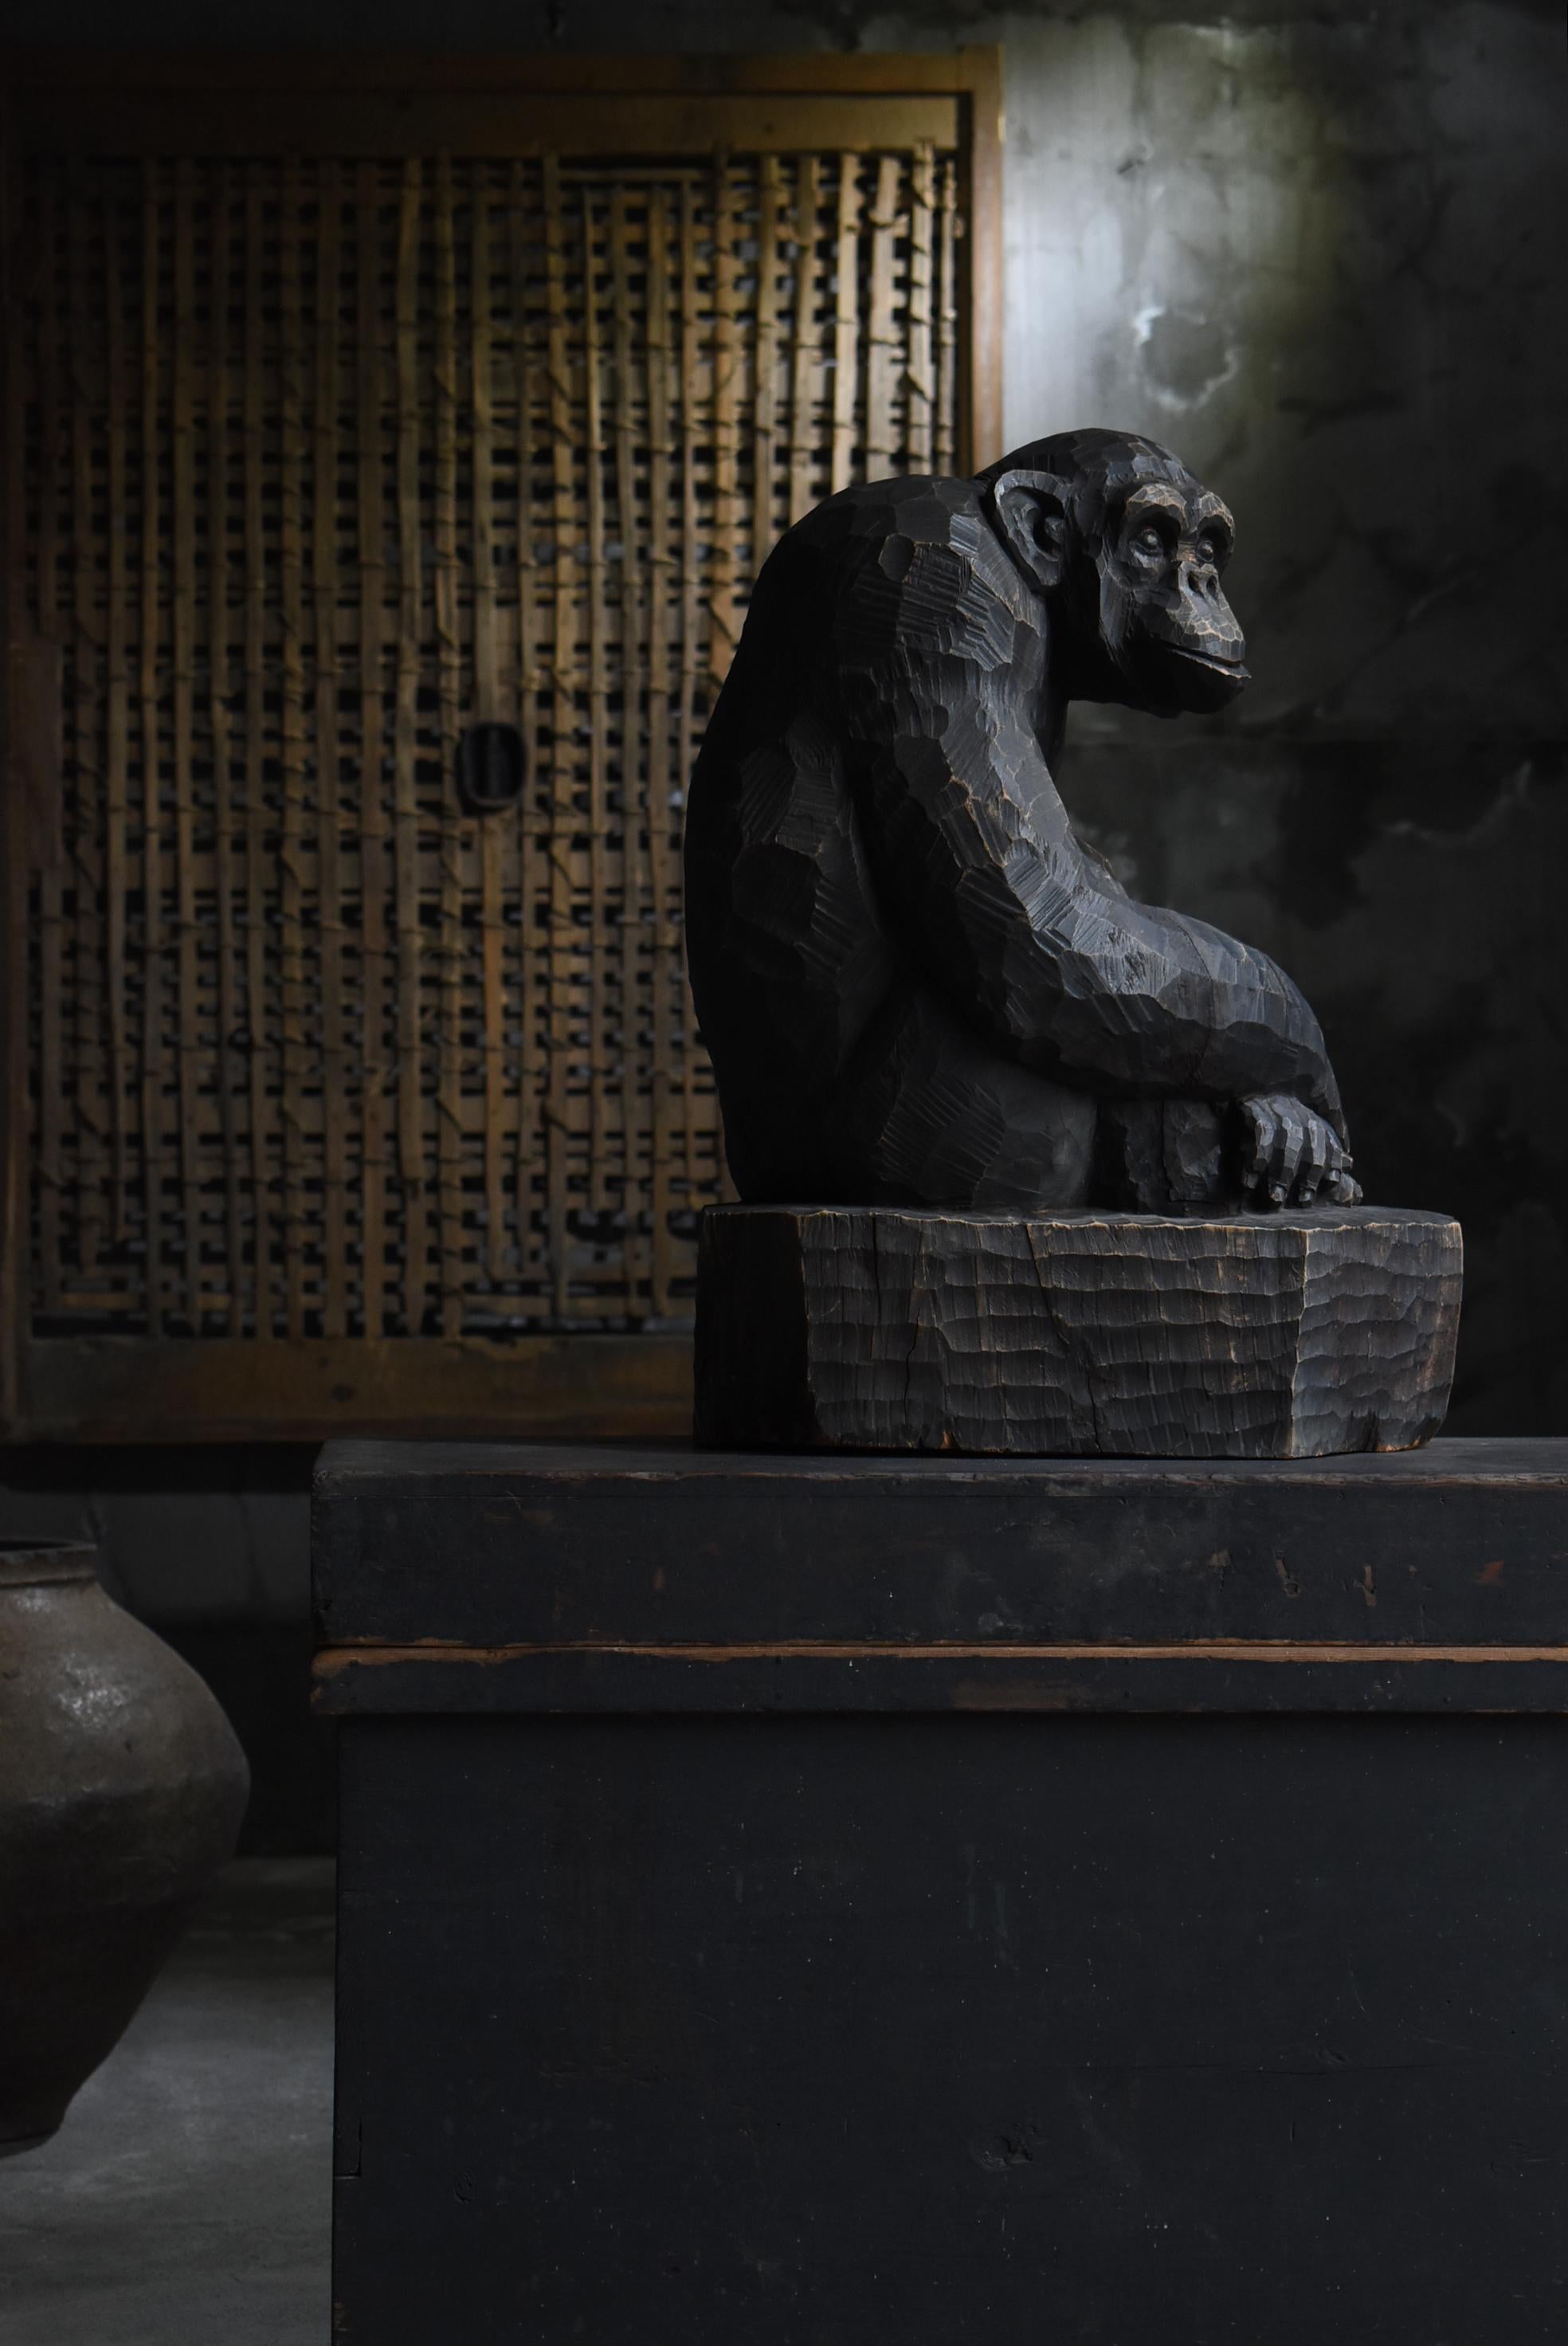 This is an old Japanese wood carving of a chimpanzee.
It is from the mid-Showa period (1940s-1960s).
It is made of camphorwood.

It is a dynamic work boldly carved from a large tree.
The chimpanzee's form is accurately expressed while leaving the